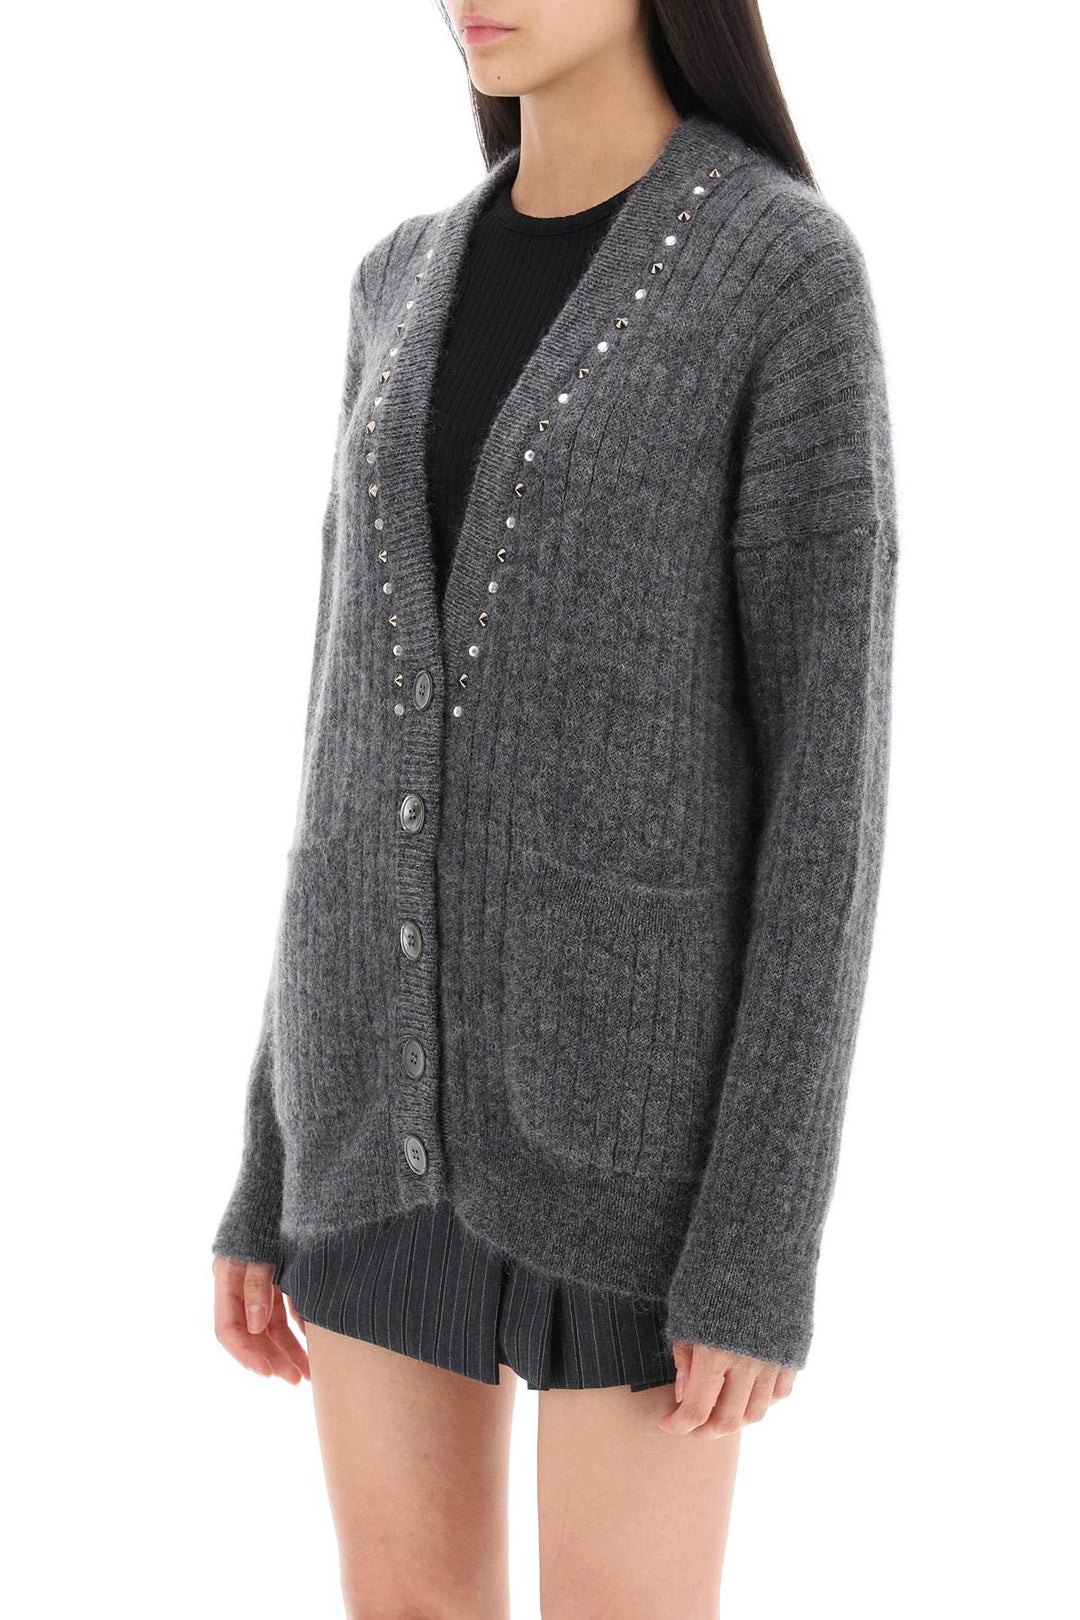 Alessandra Rich Cardigan With Studs And Crystals   Grigio